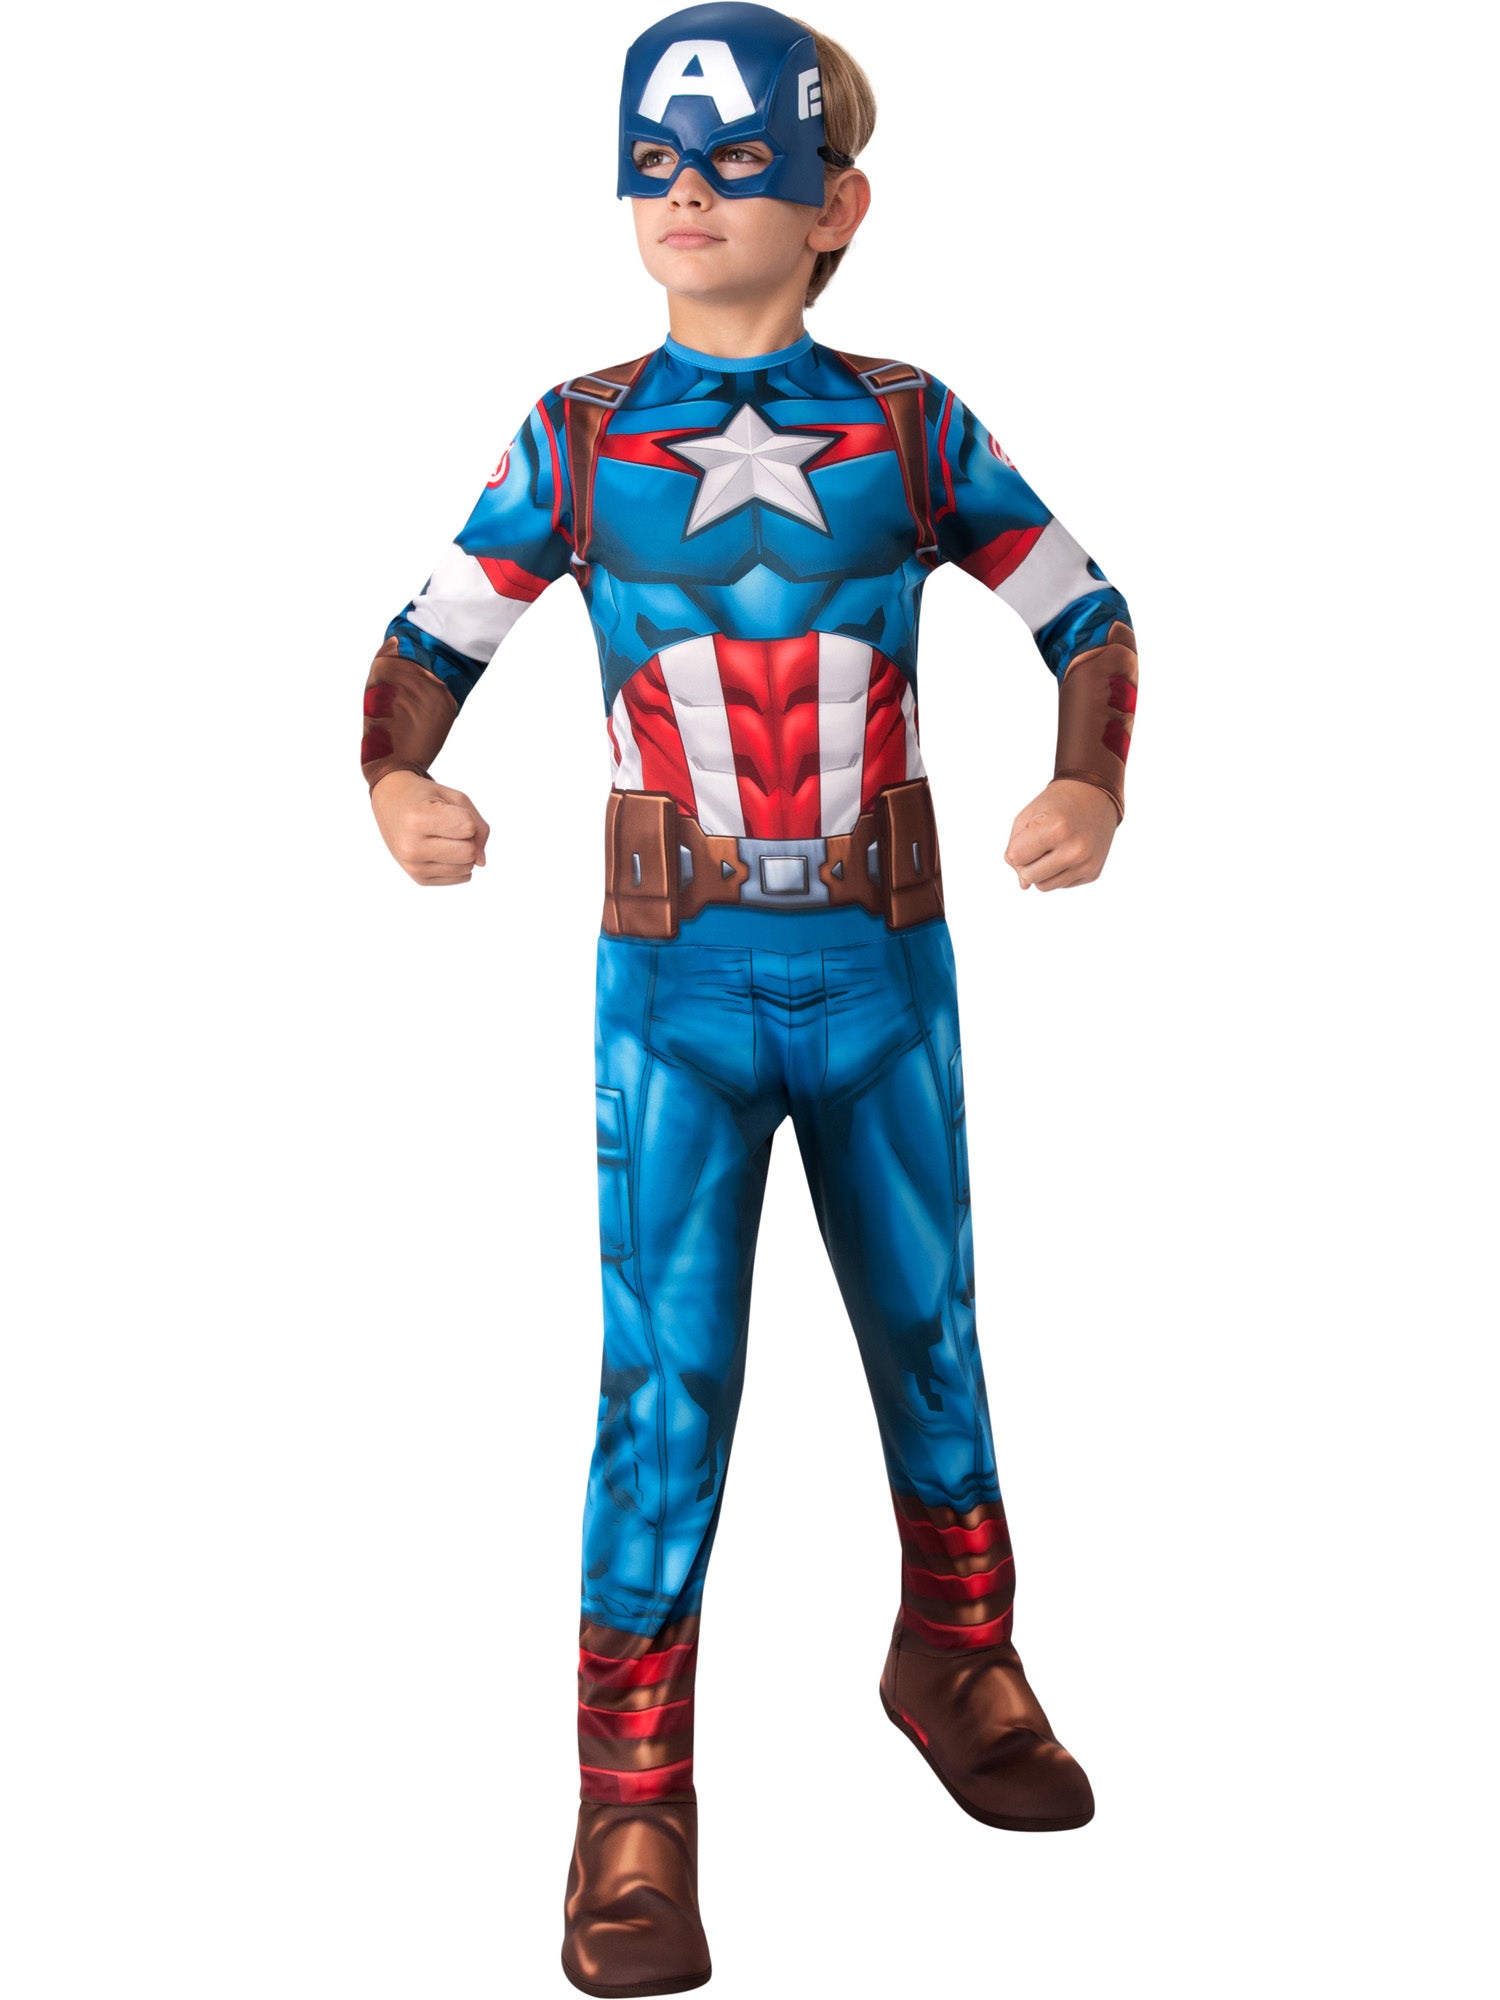 Captain America, Avengers, Multi, Marvel, Kids Costumes, Extra Small, Other